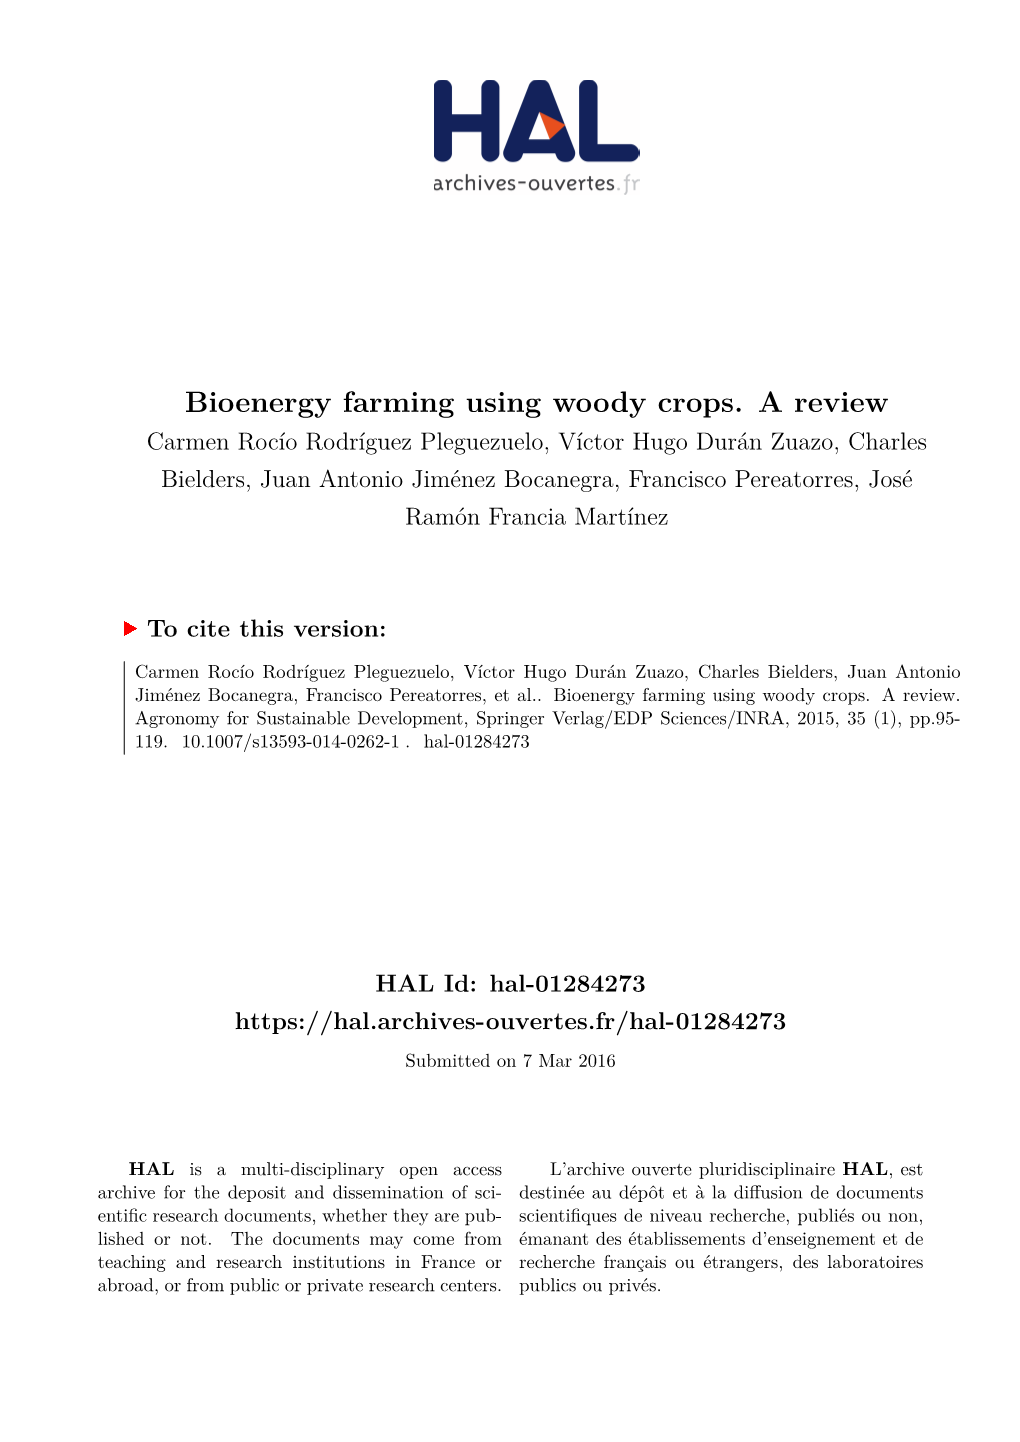 Bioenergy Farming Using Woody Crops. a Review